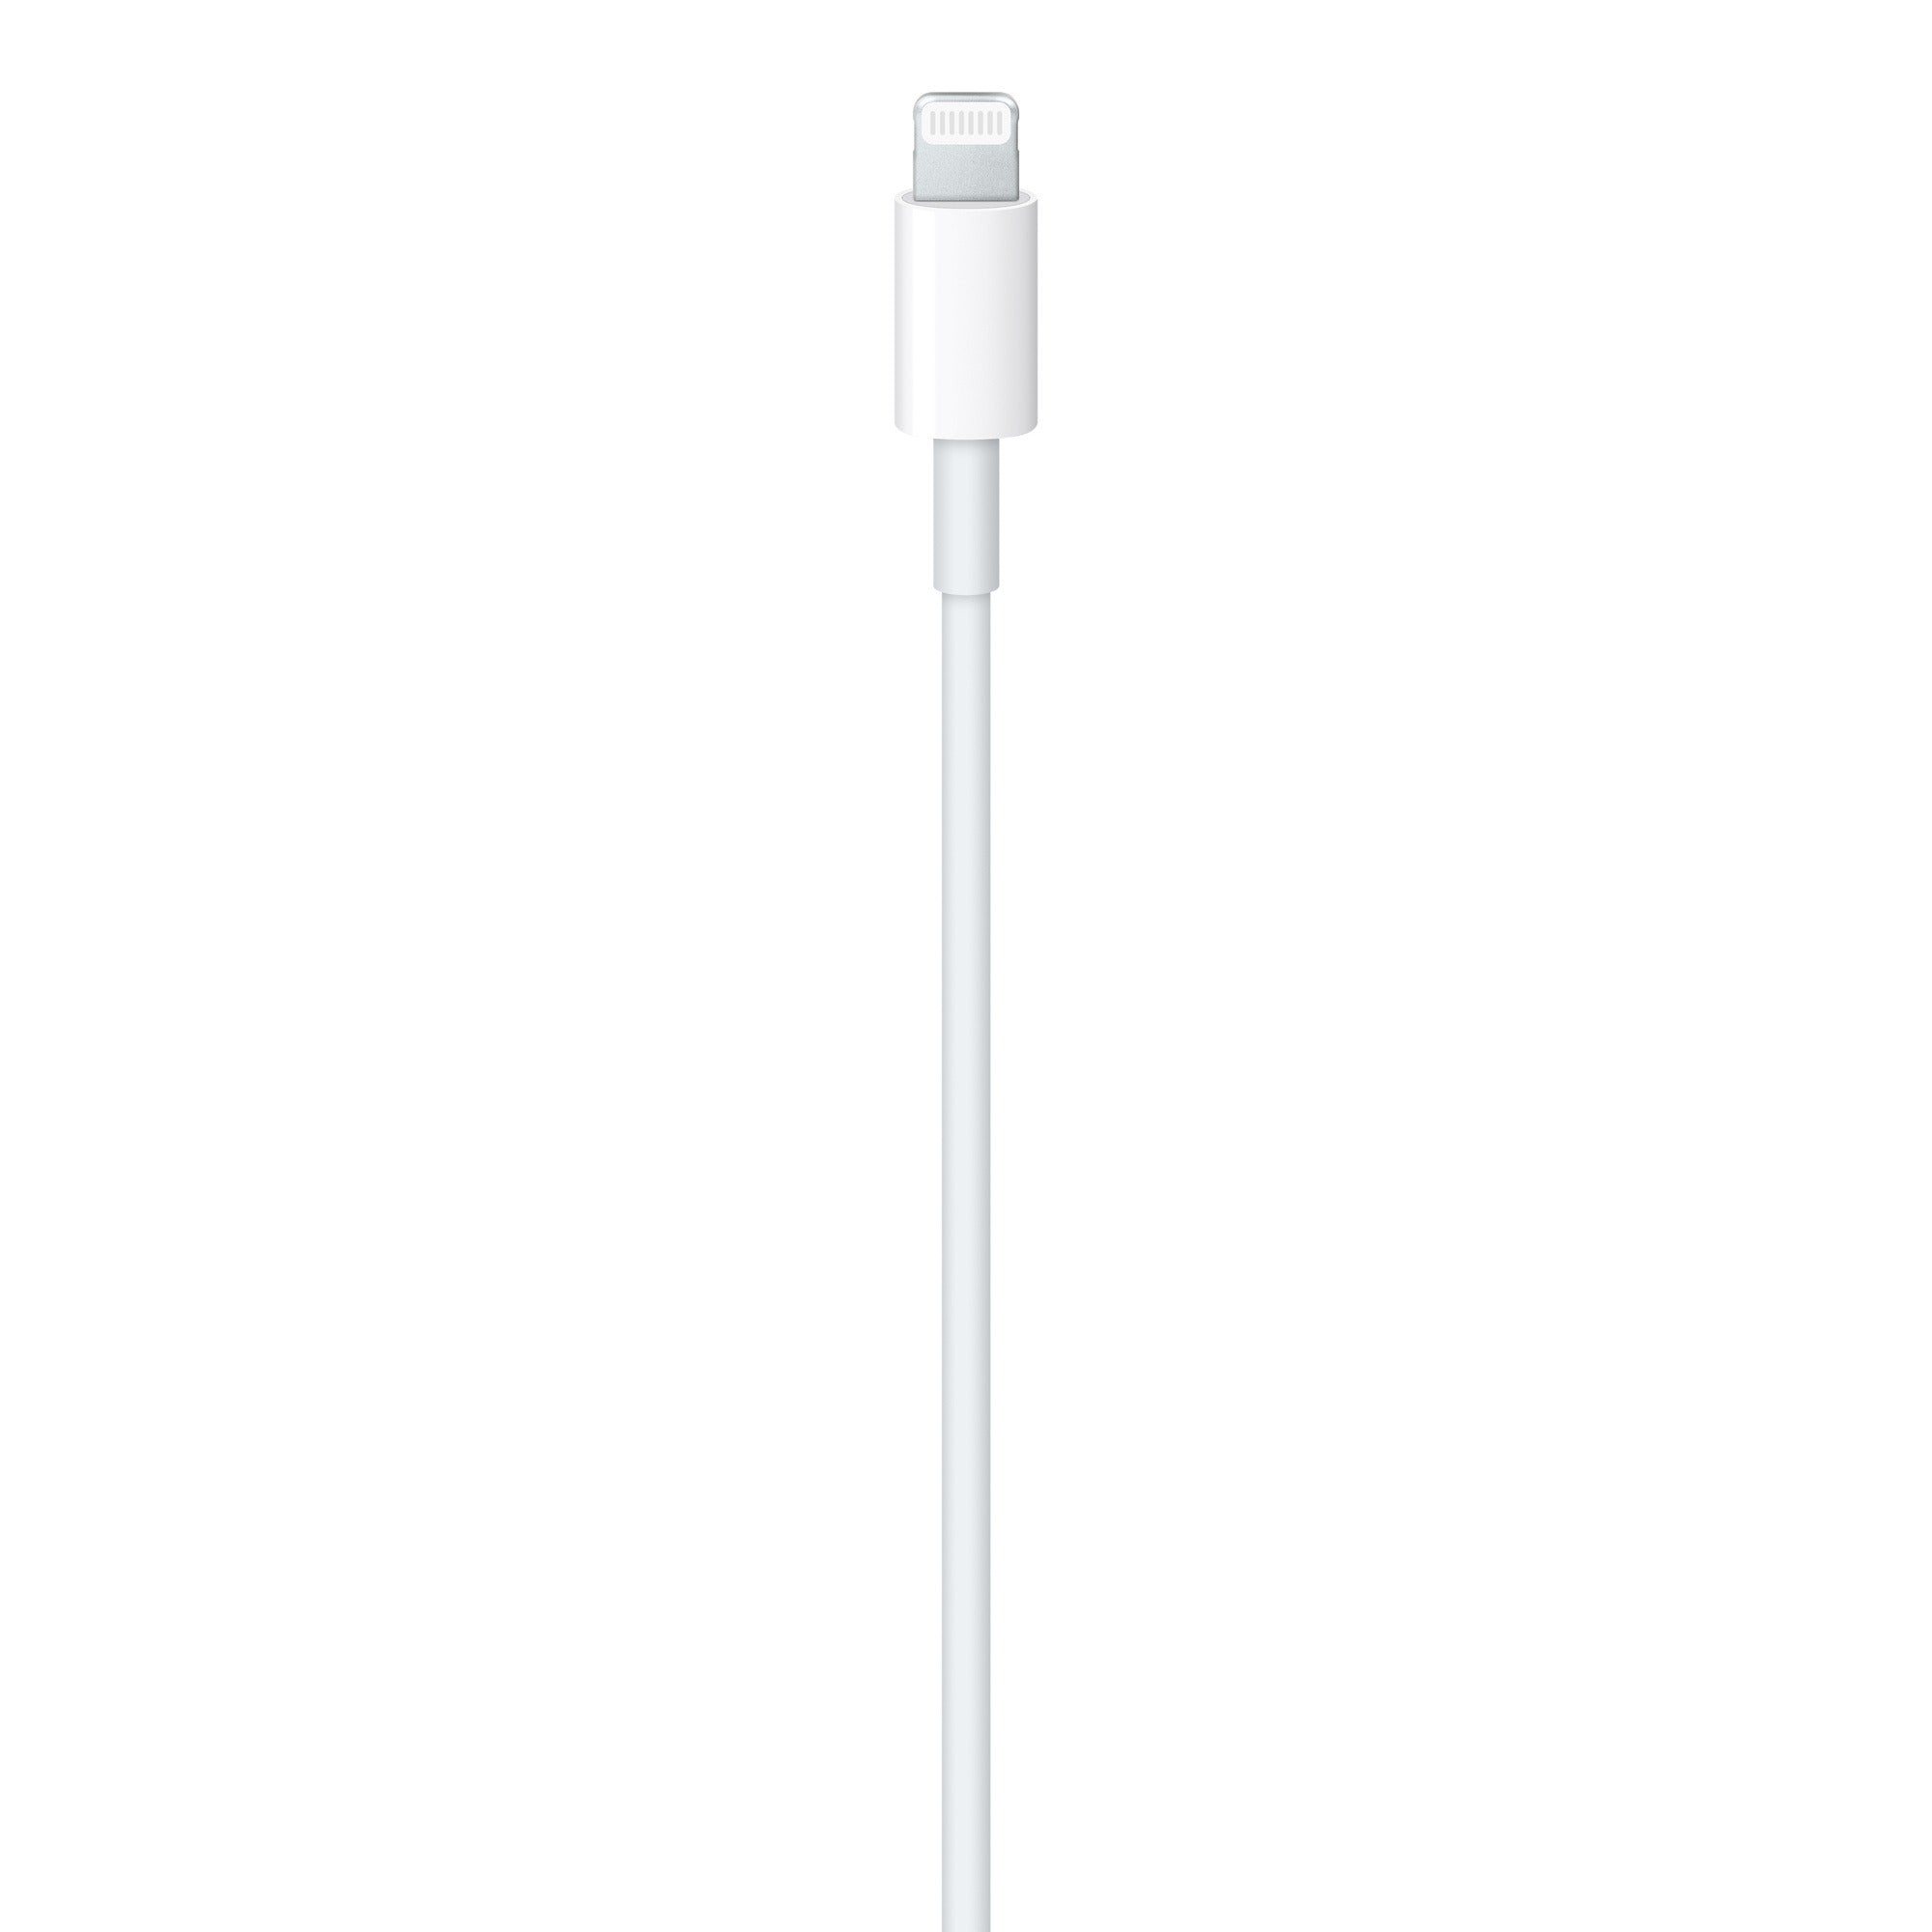 Genuine Apple USB-C to Lightning Cable A2561 - Bulk Packaging - (1m)